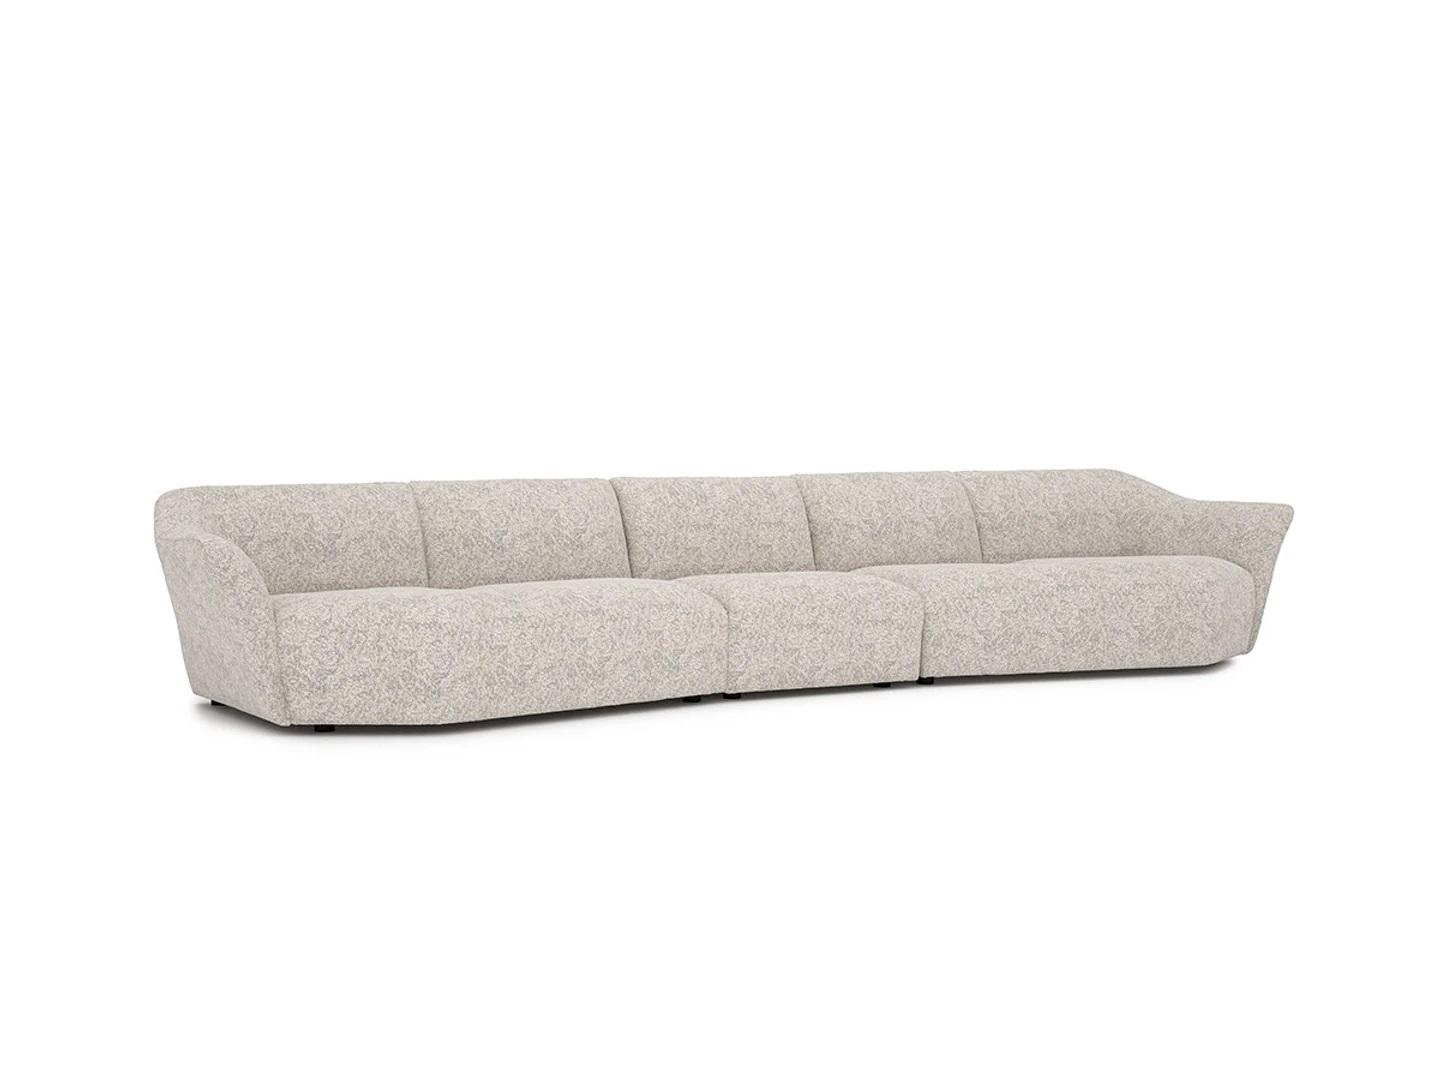 Five Seater Sofa Couch 440cm Living Room White Furnishing Textile Upholstery